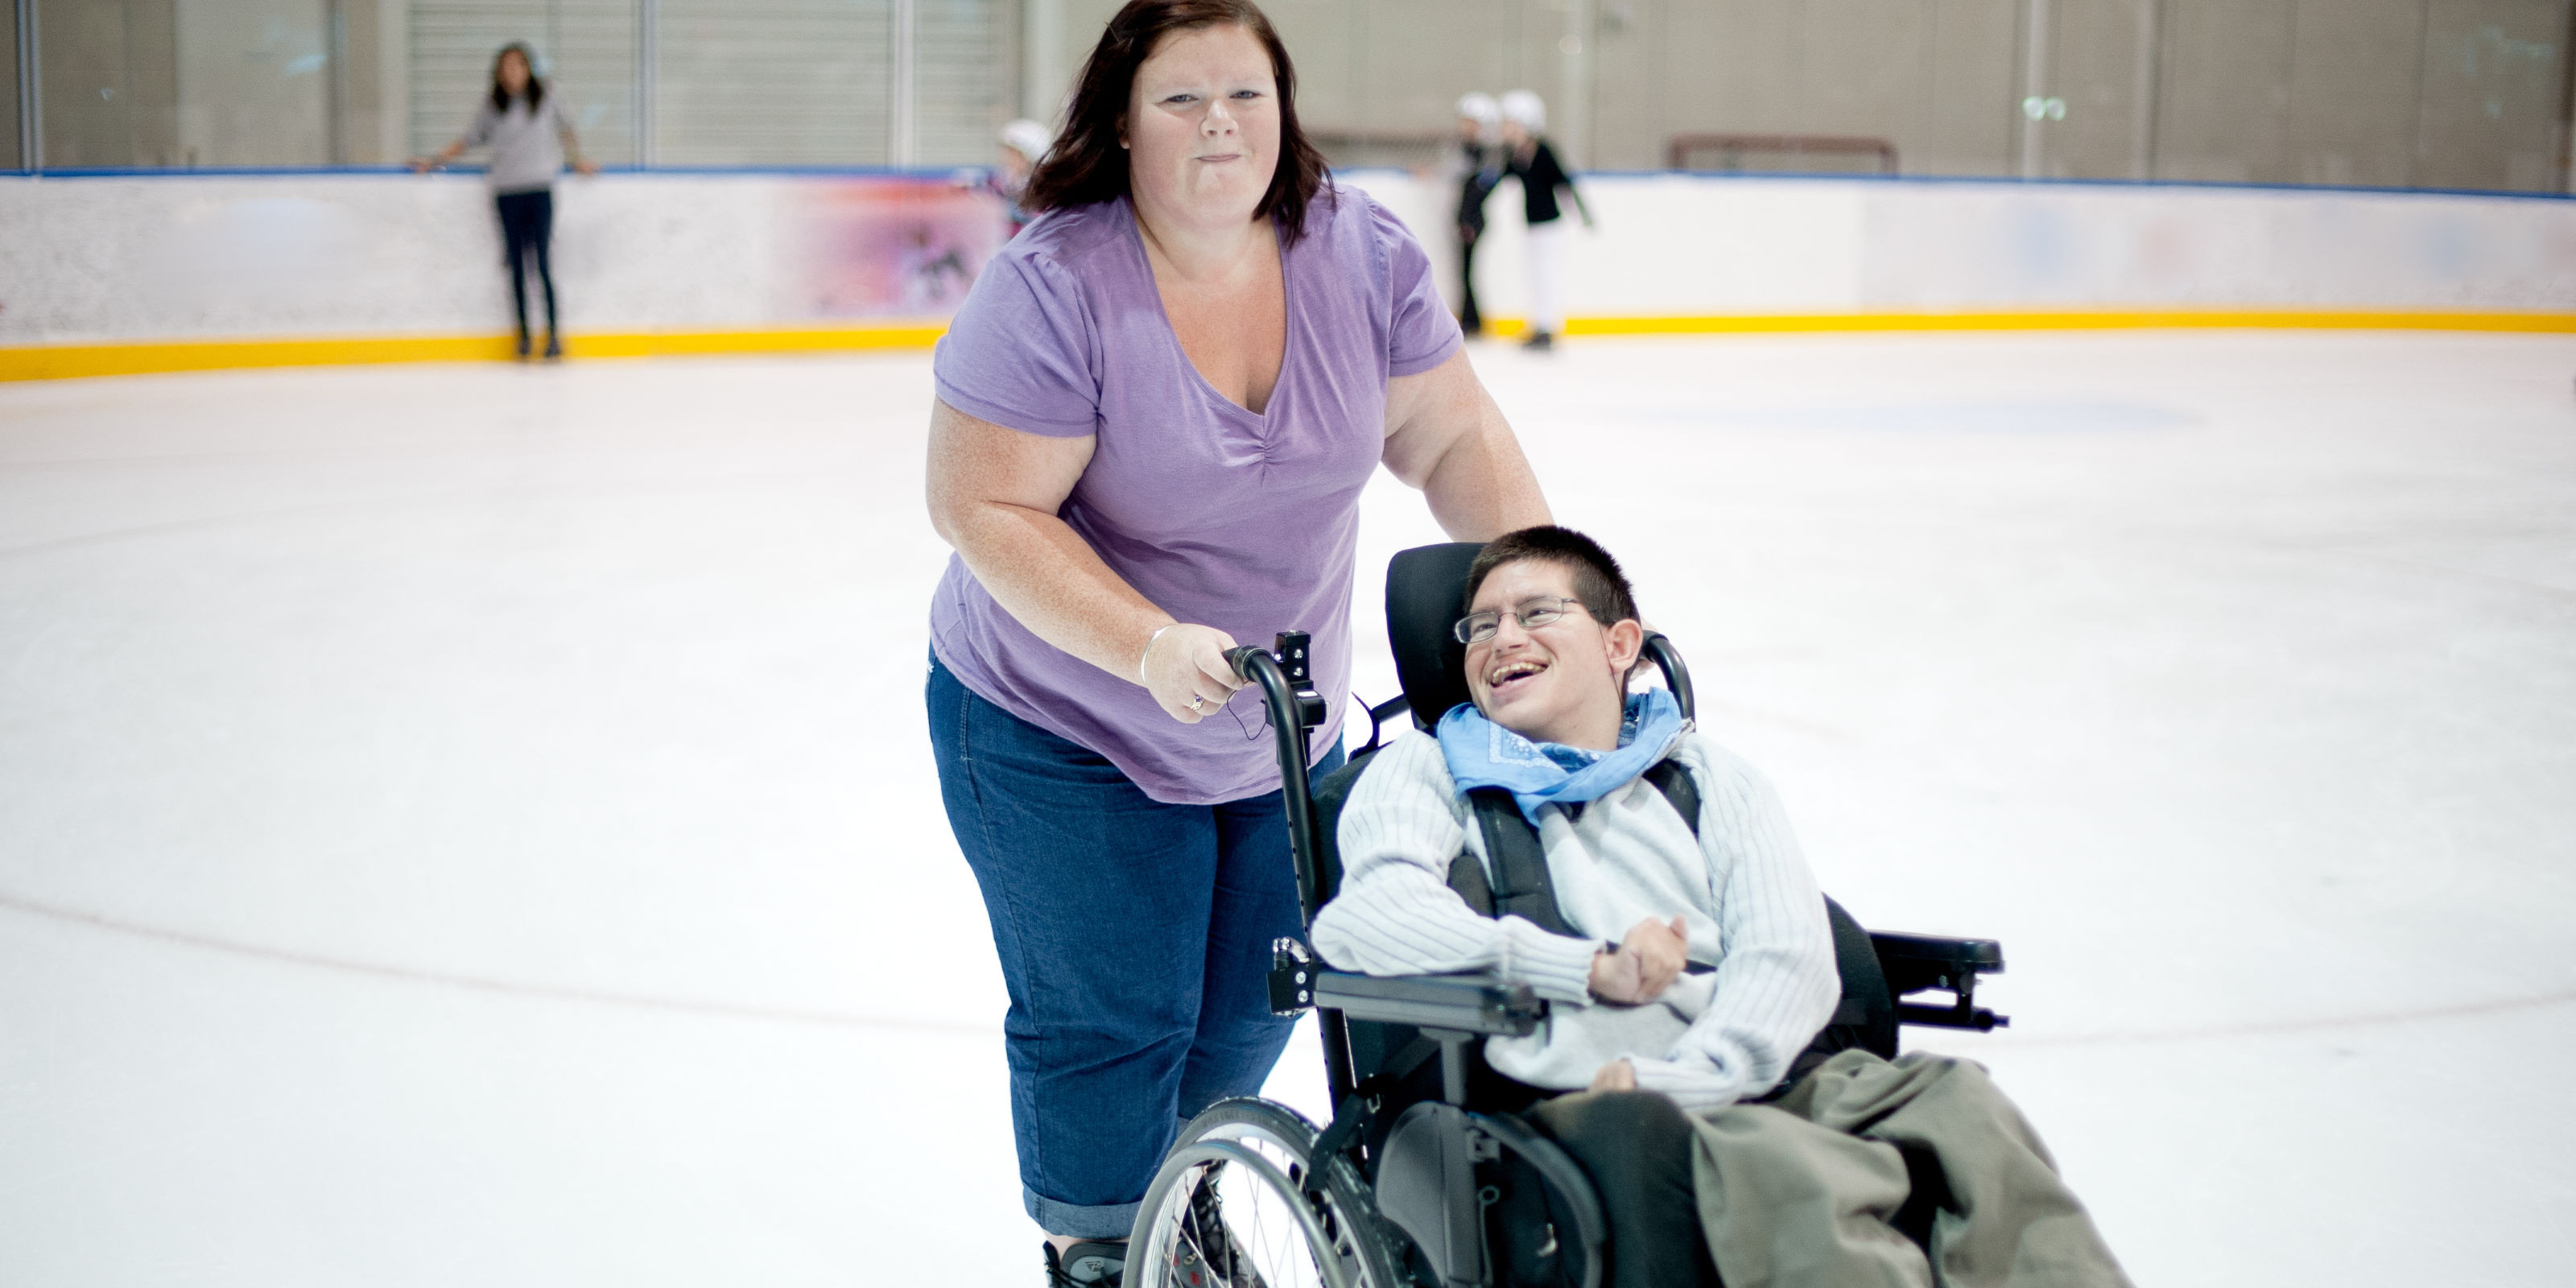 A carer pushes the wheelchair of a client across a skating rink.